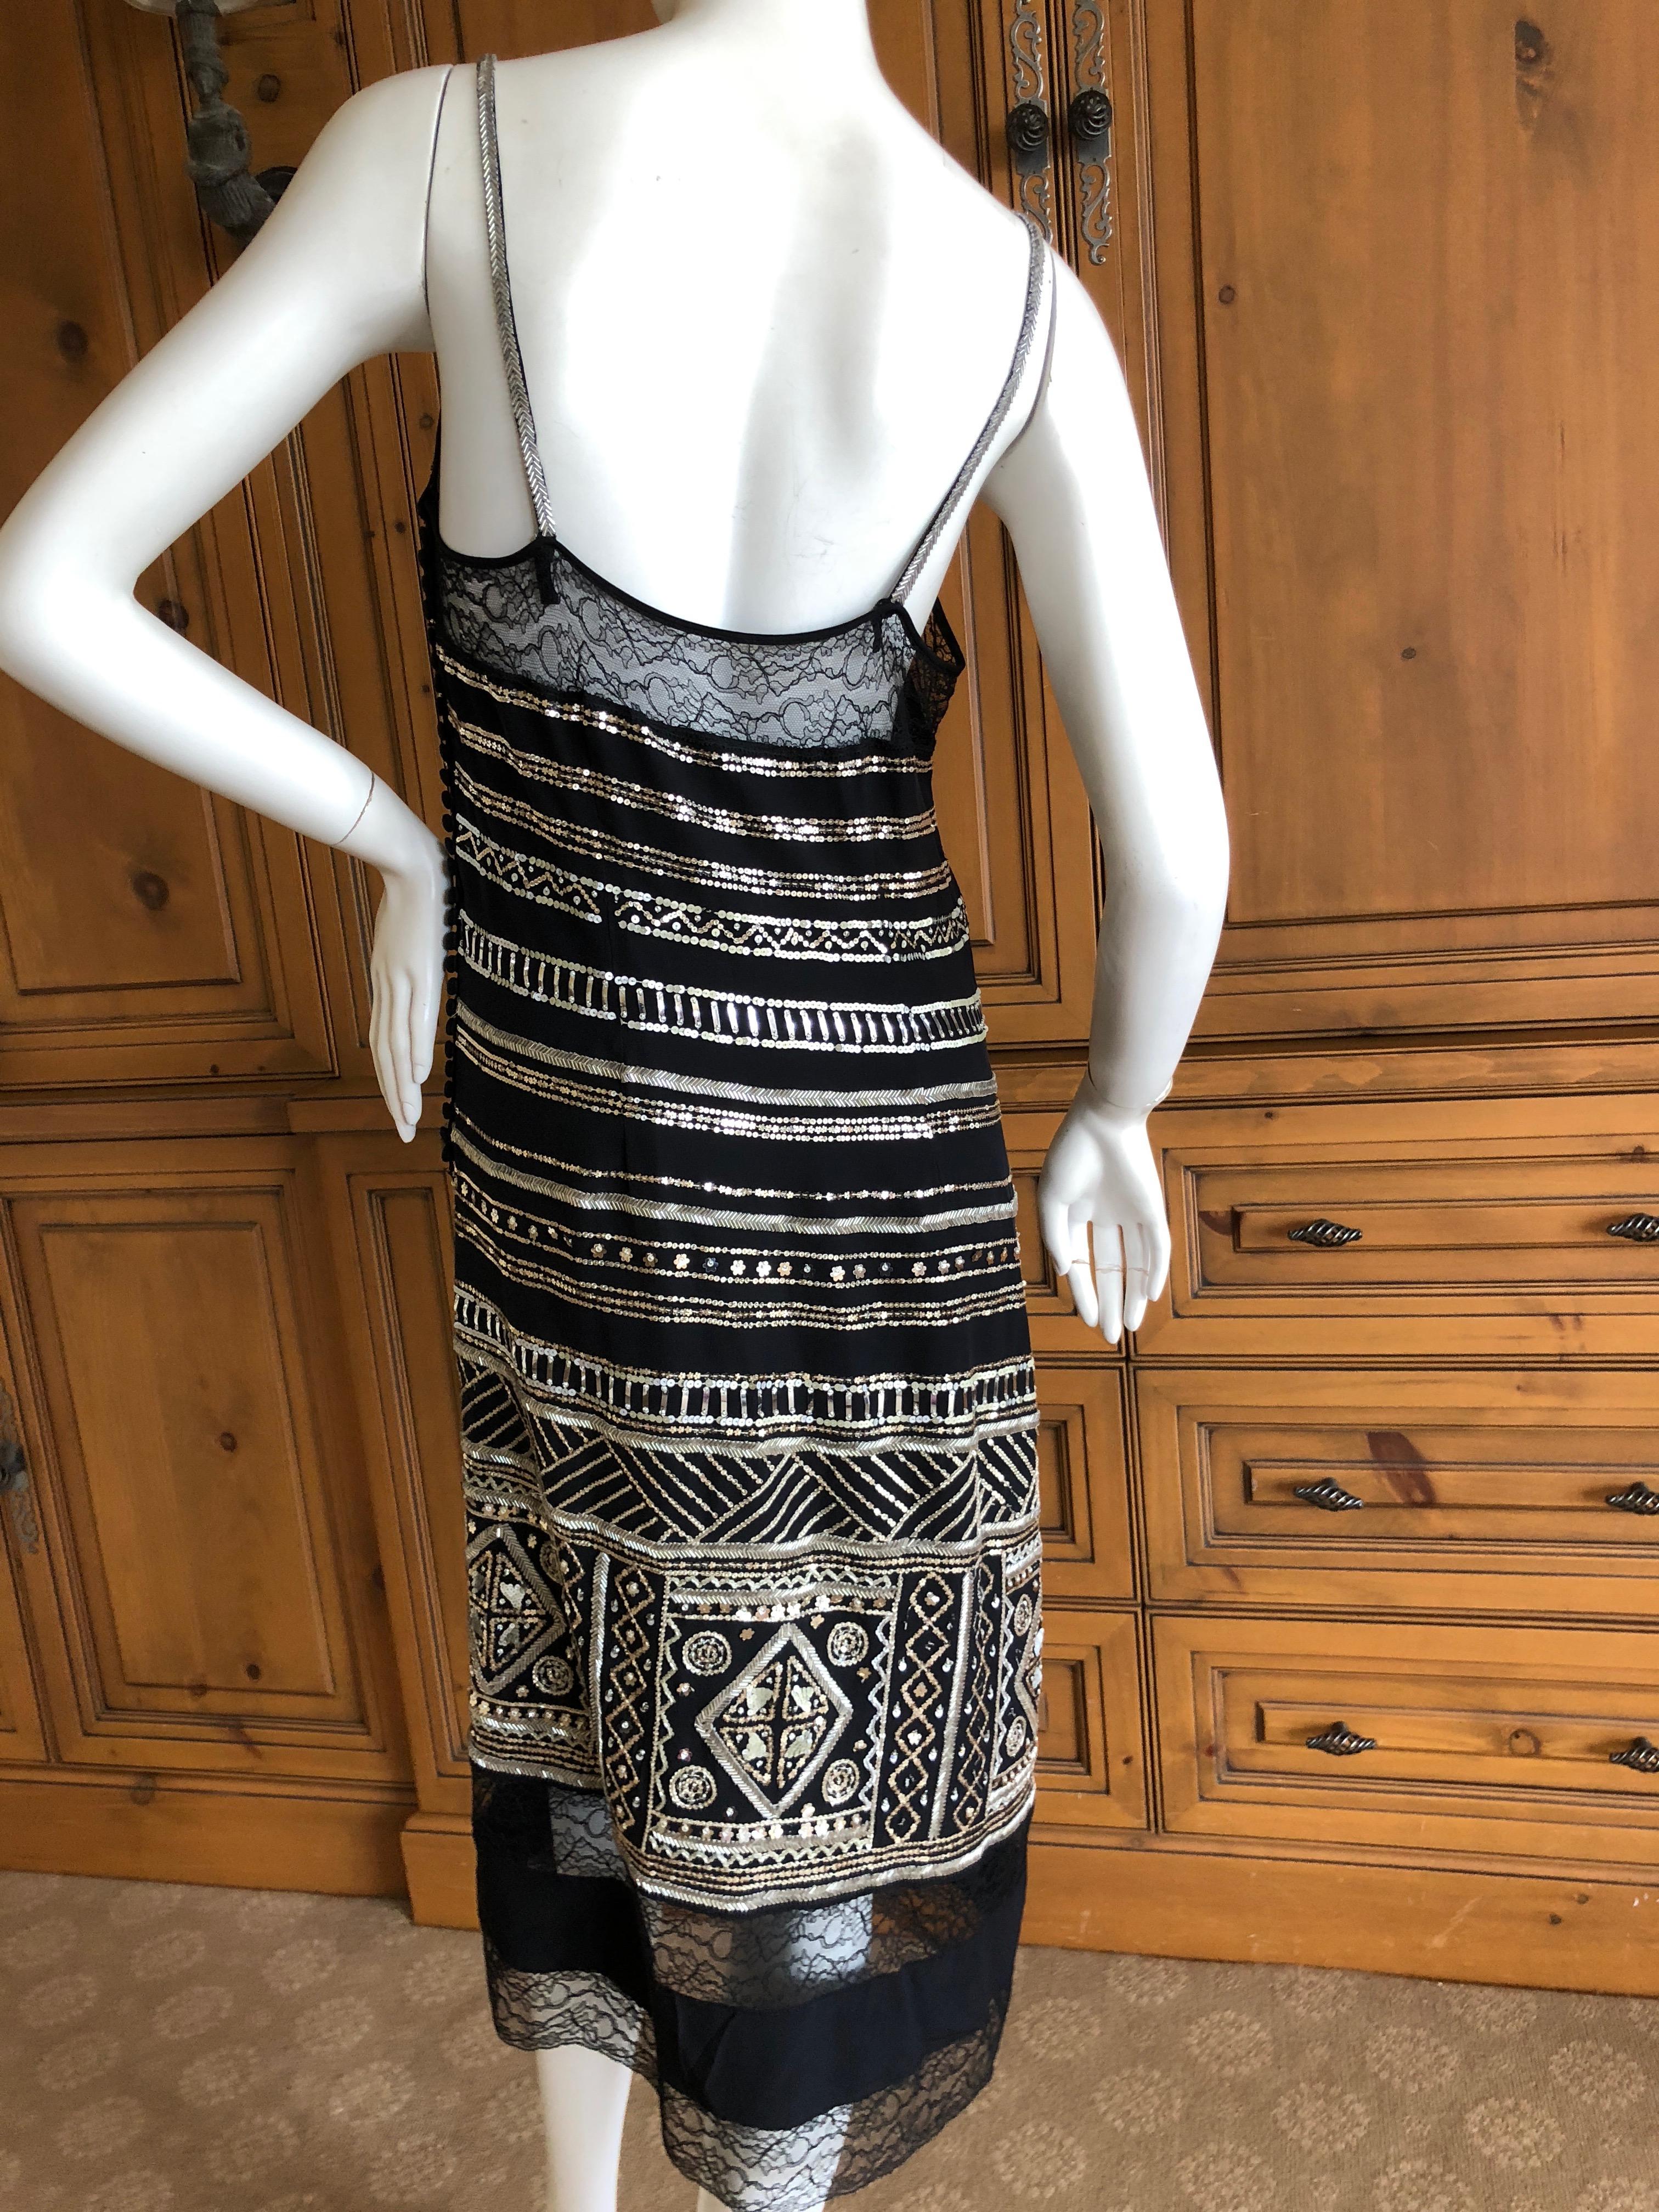 Christian Dior John Galliano's 2nd Dior Collection Assuit Flapper Dress, 1998 For Sale 3